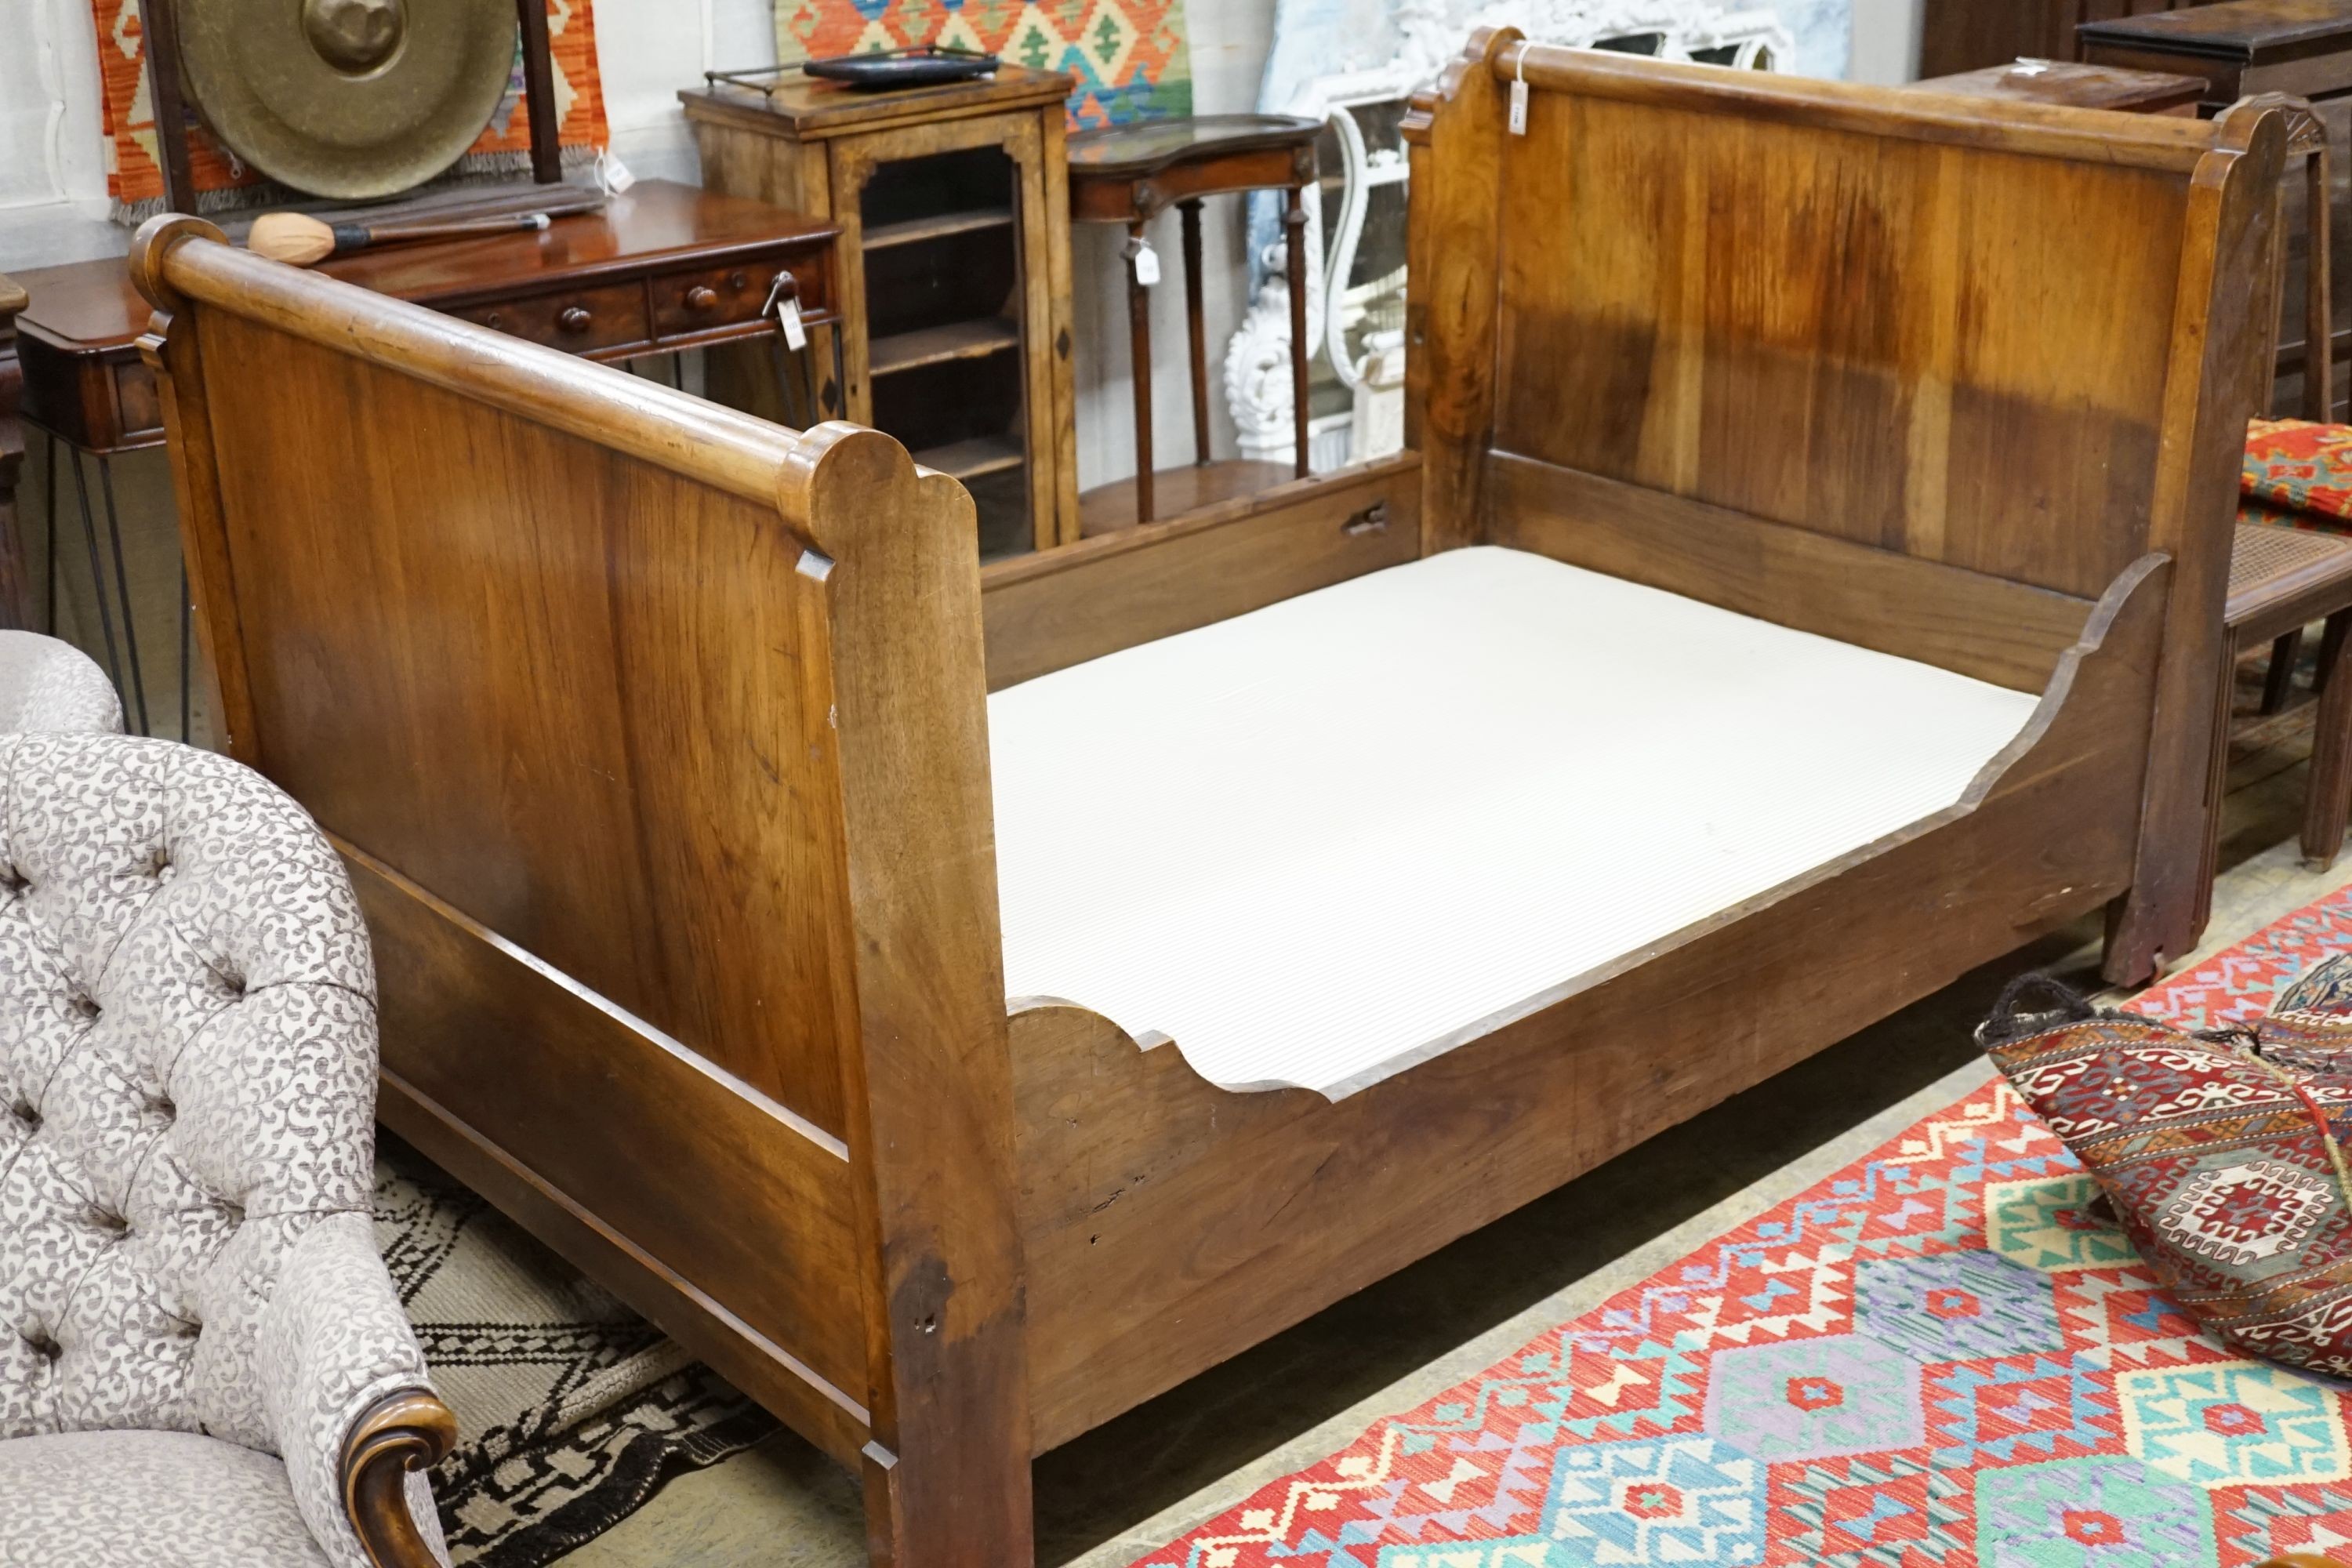 A 19th century Continental Gothic Revival mahogany sleigh bed, 209cm long, 126cm wide